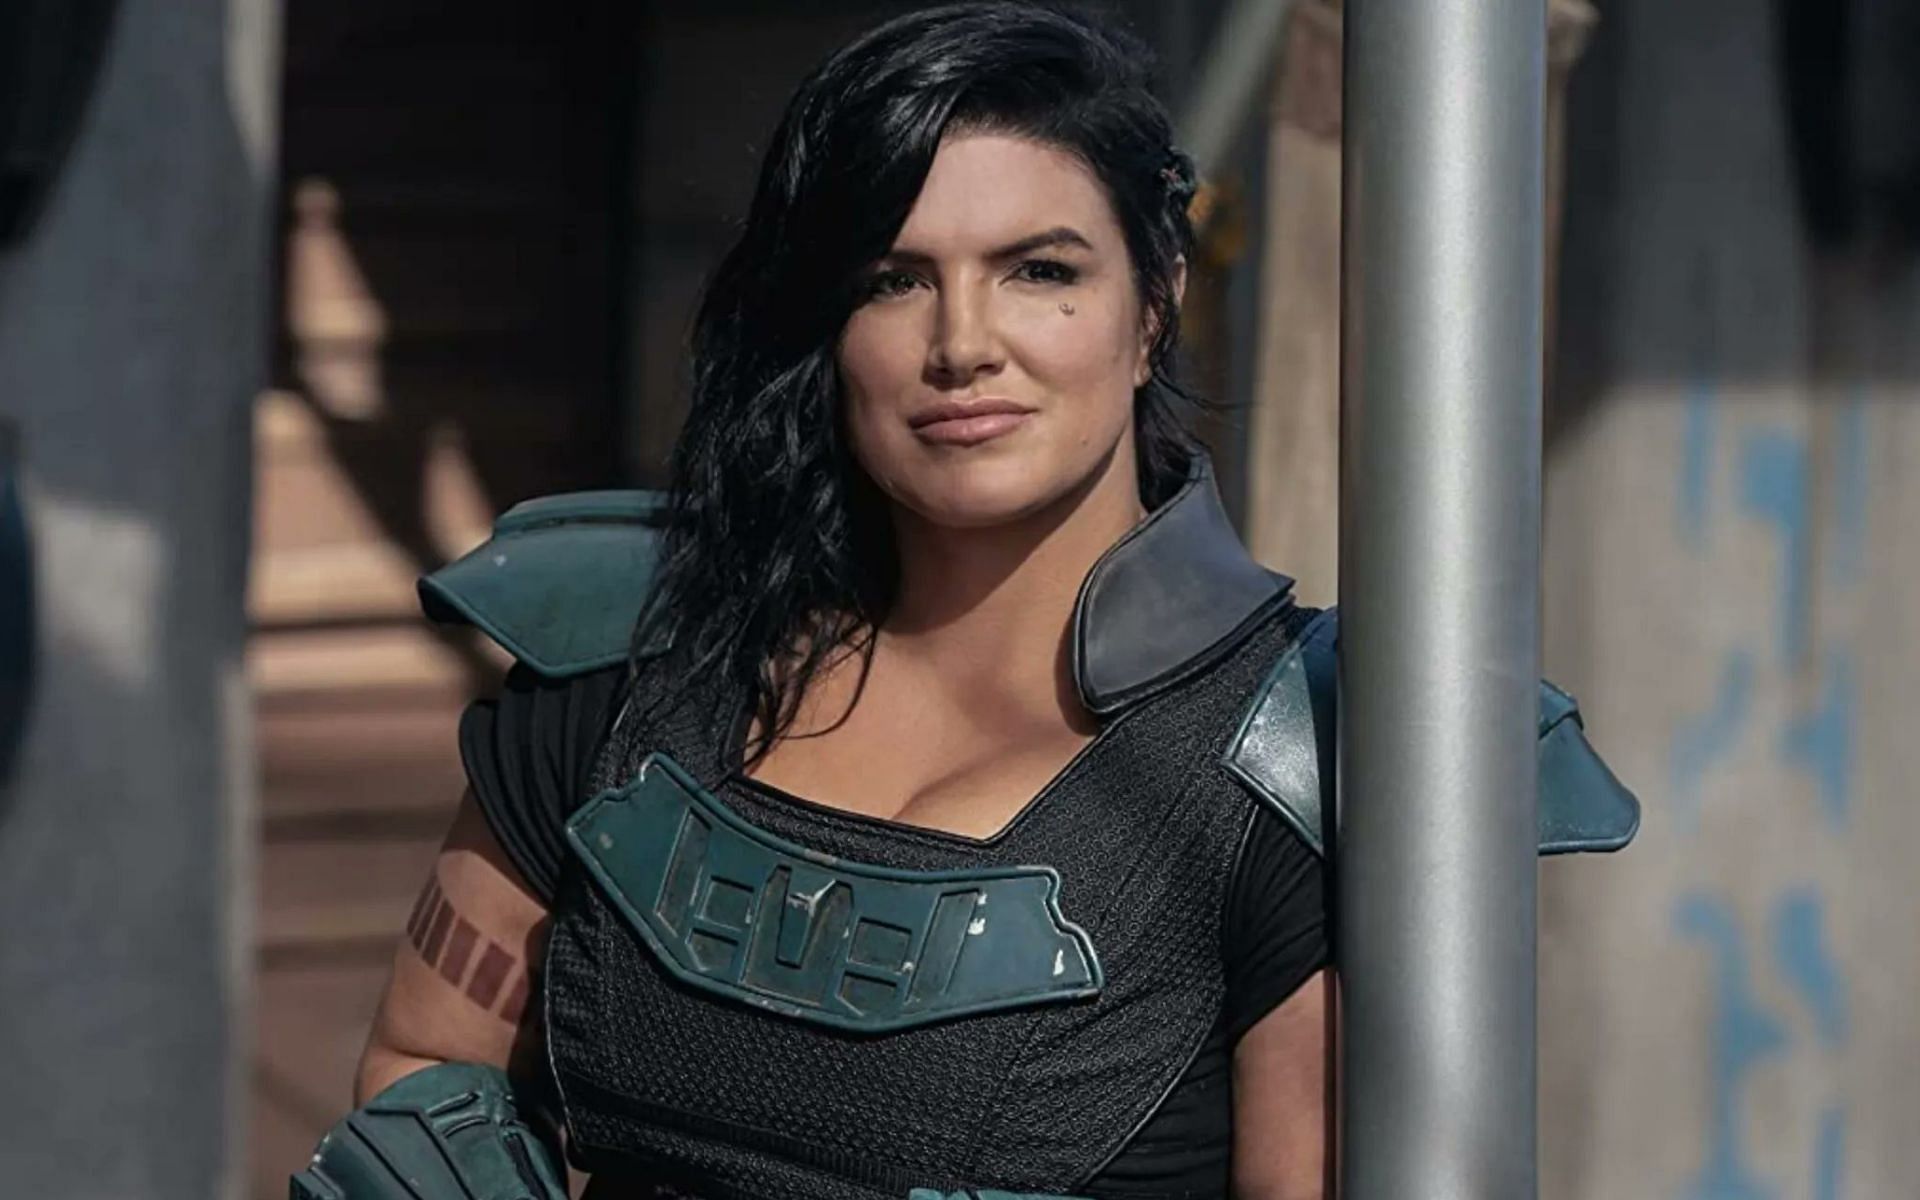 Gina Carano as Cara Dune [Image courtesy: @movieguide on Twitter]